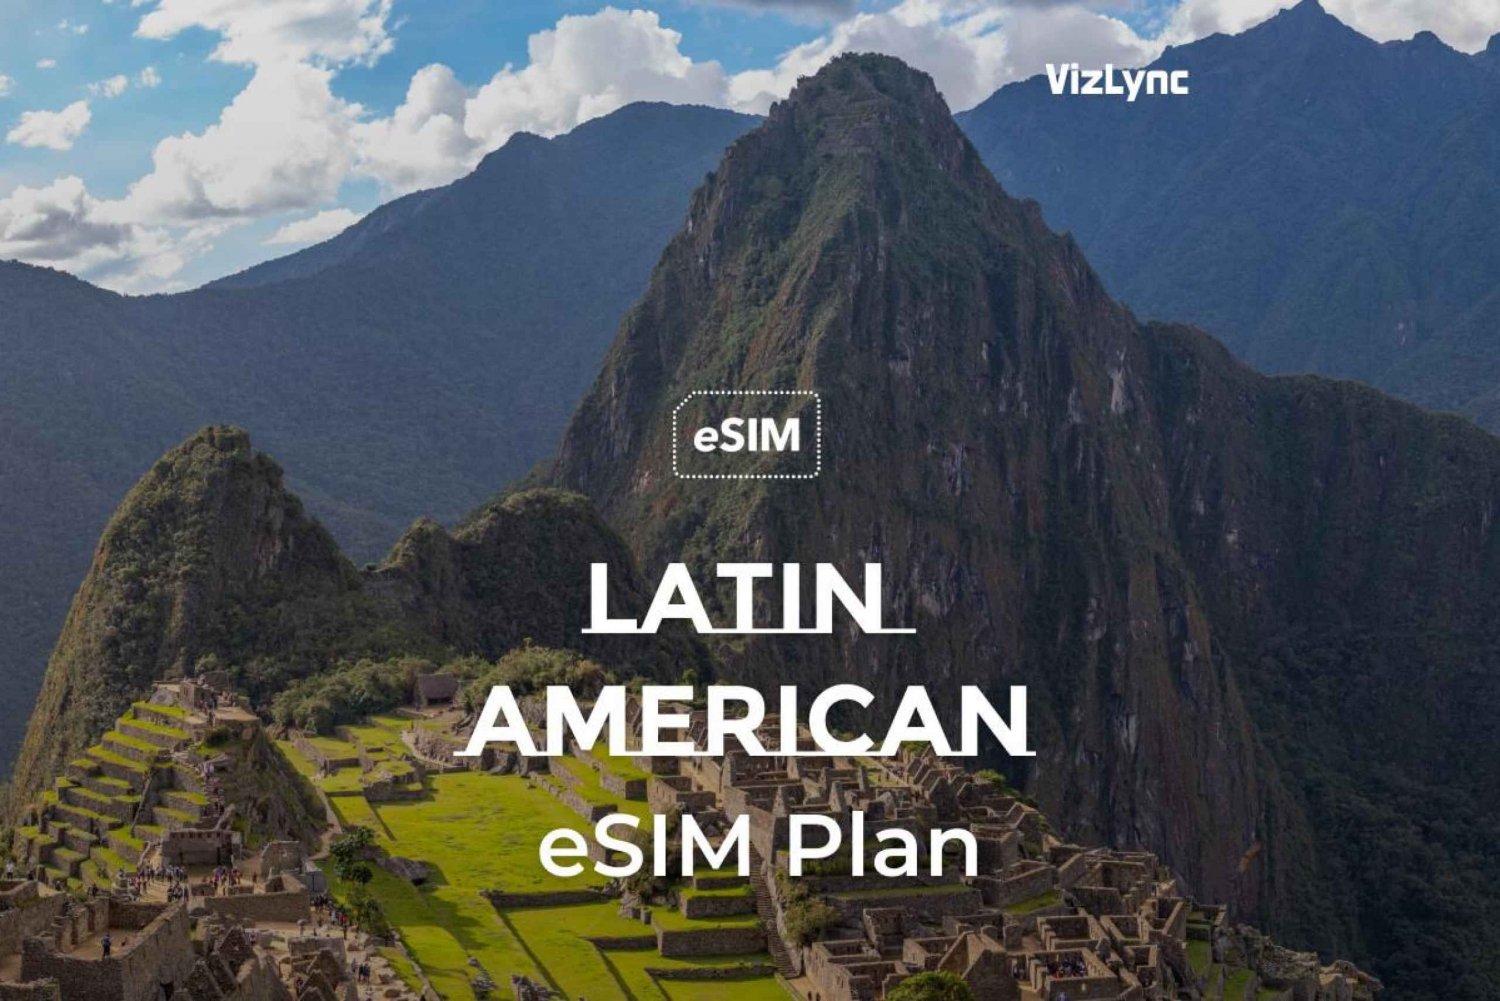 Stay Connected Across Latin America with Our Data-Only eSIMs